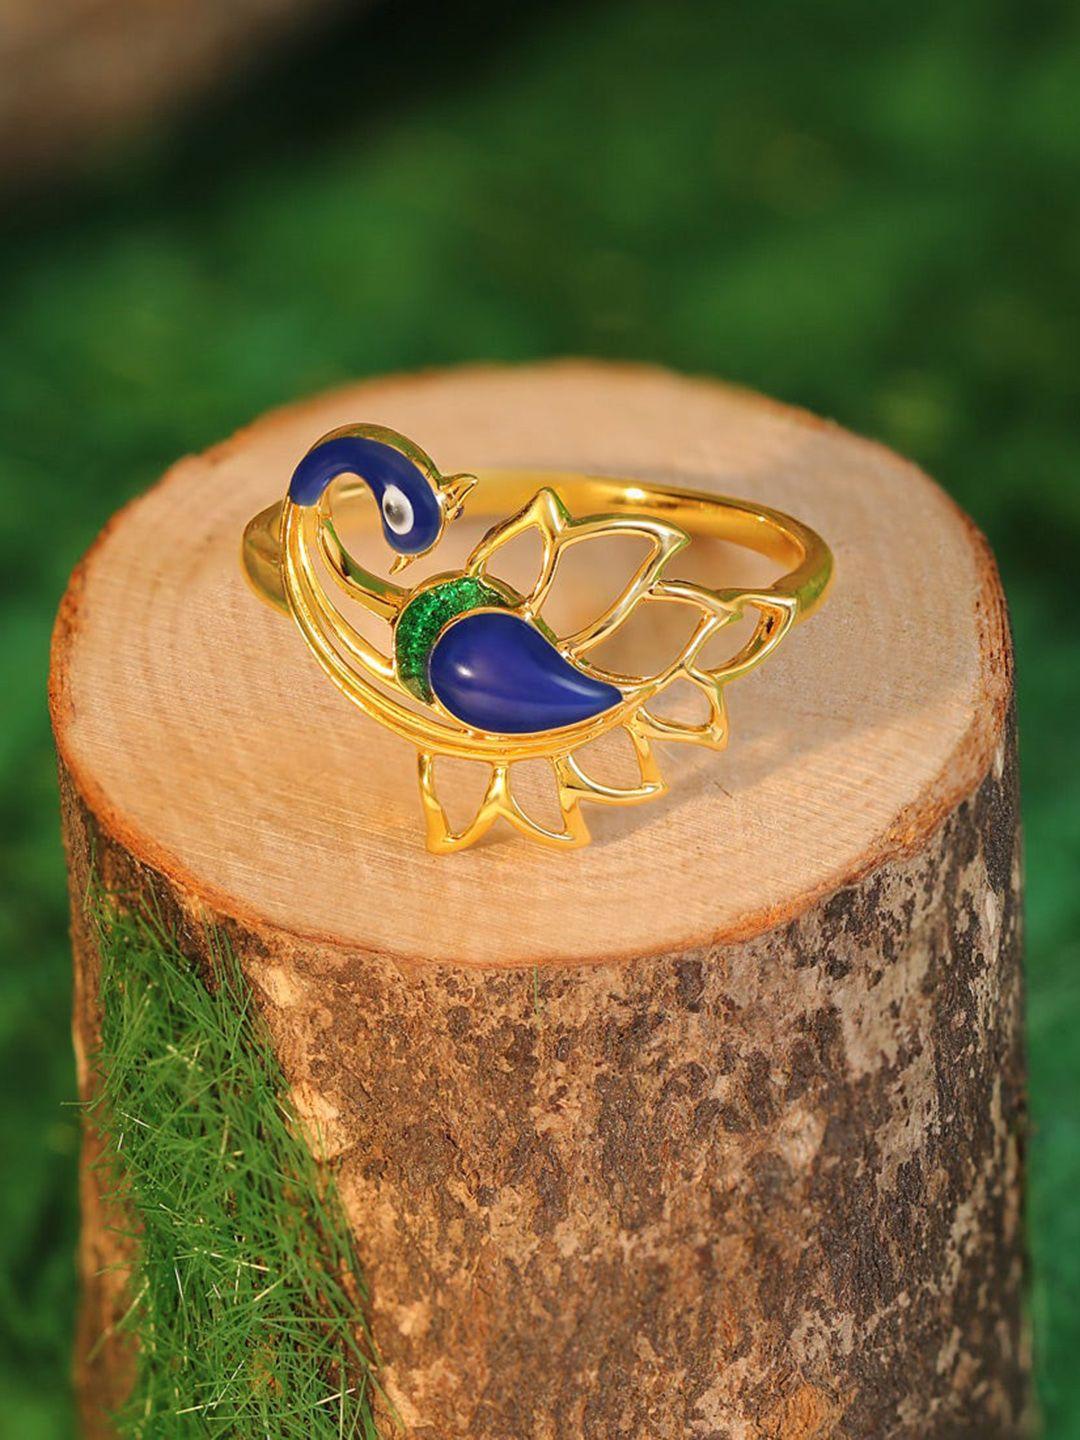 candere a kalyan jewellers company peacock 18kt bis hallmark gold ring-1.99gm